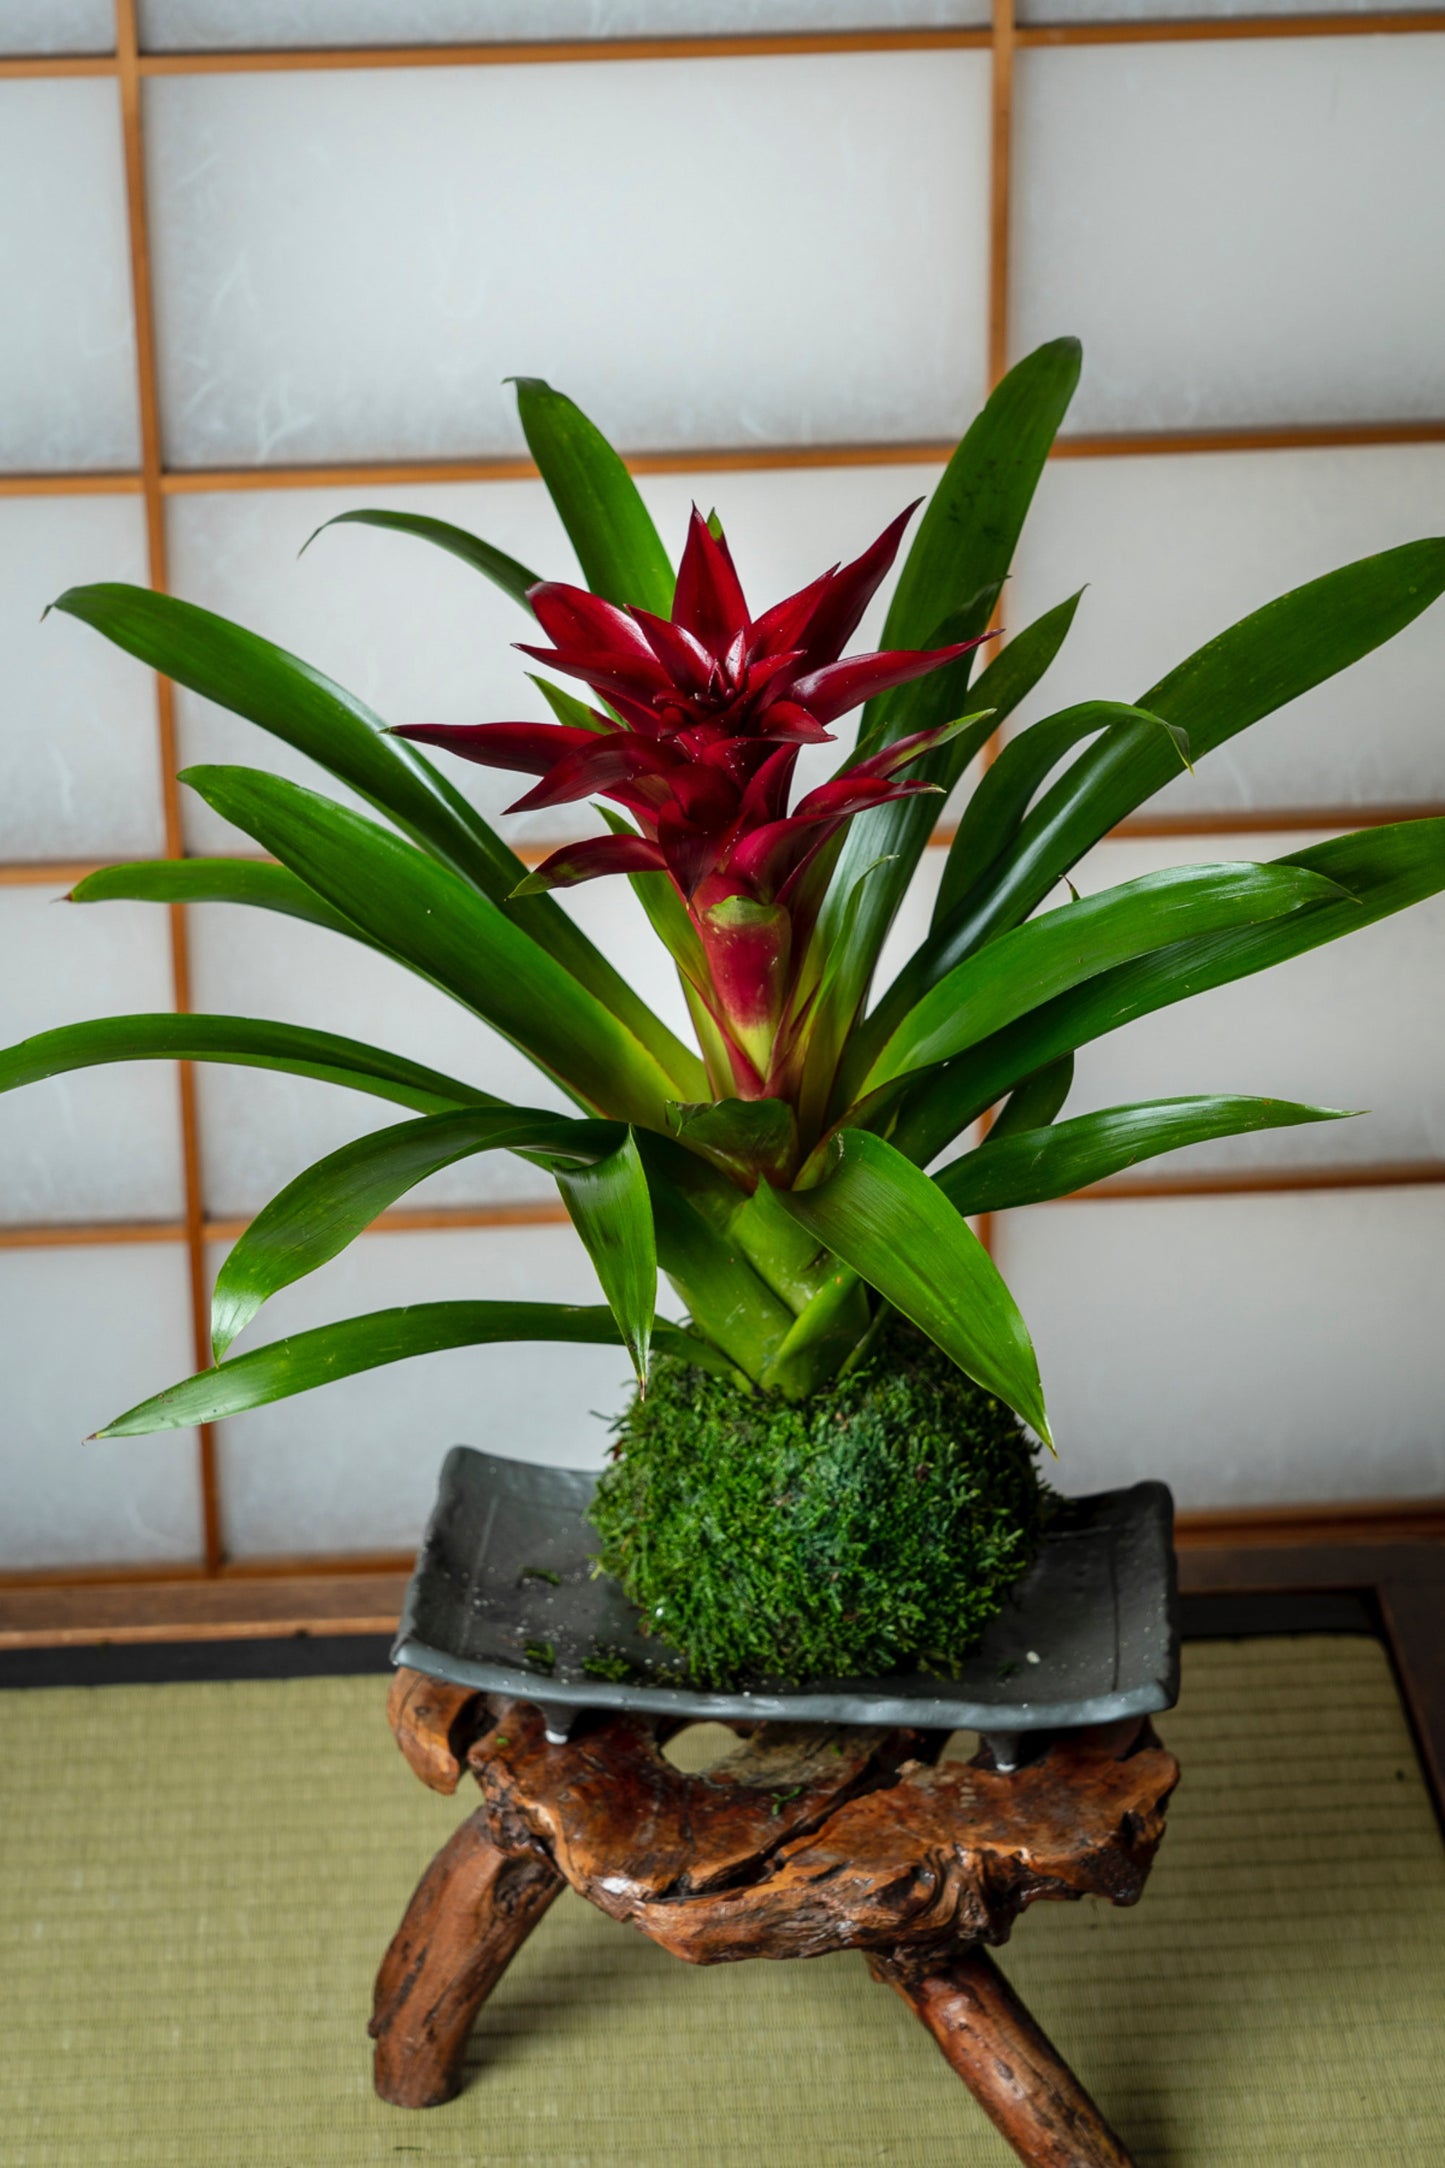 Lovely Burgundy colored Bromeliad Kokedama - Moss ball, Japanese indoor garden technique, cleanliness look live house decoration.